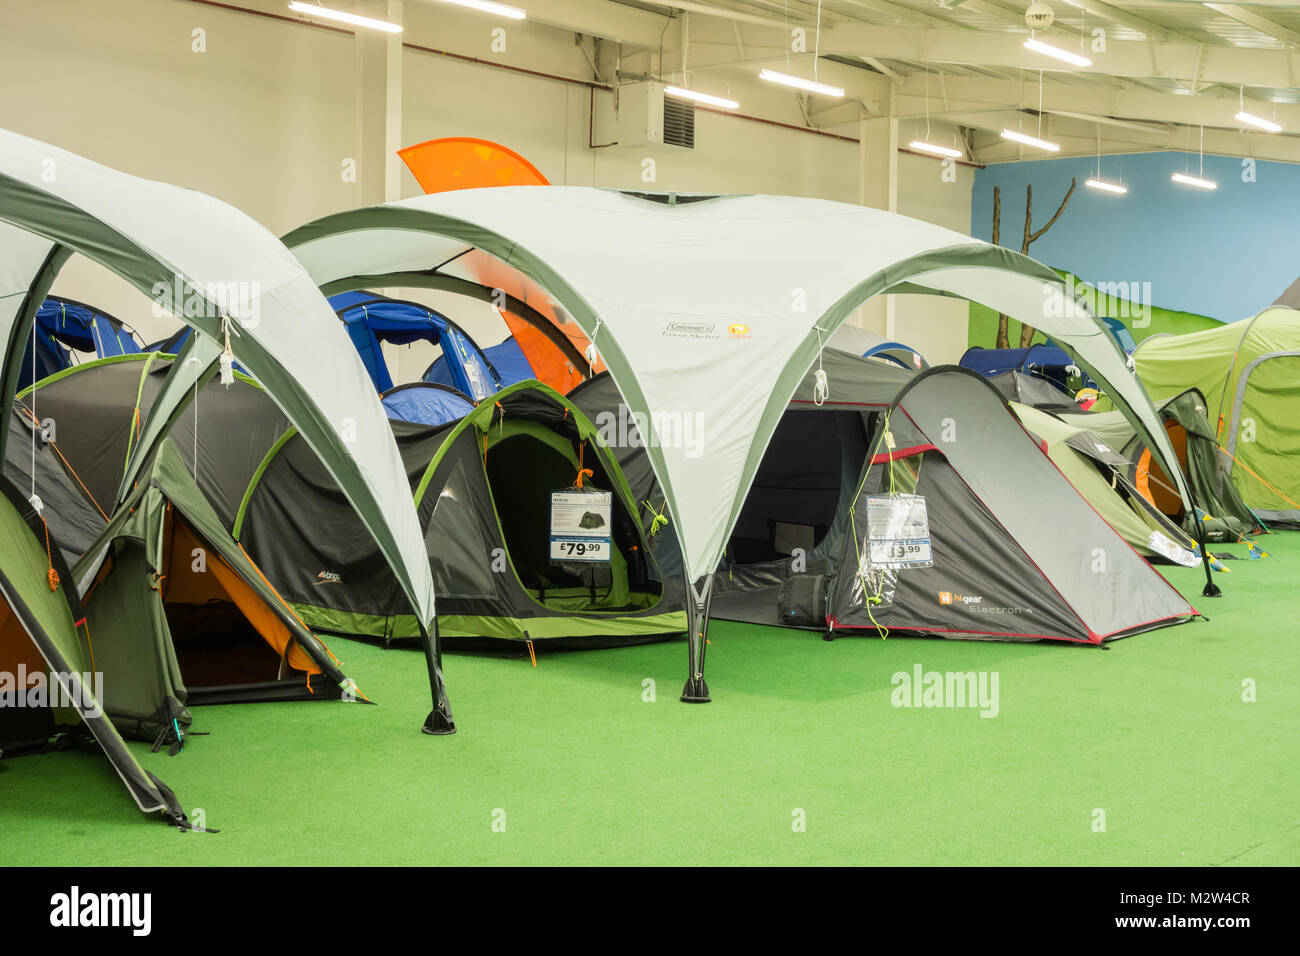 Tent display in Go outdoors store. UK Stock Photo